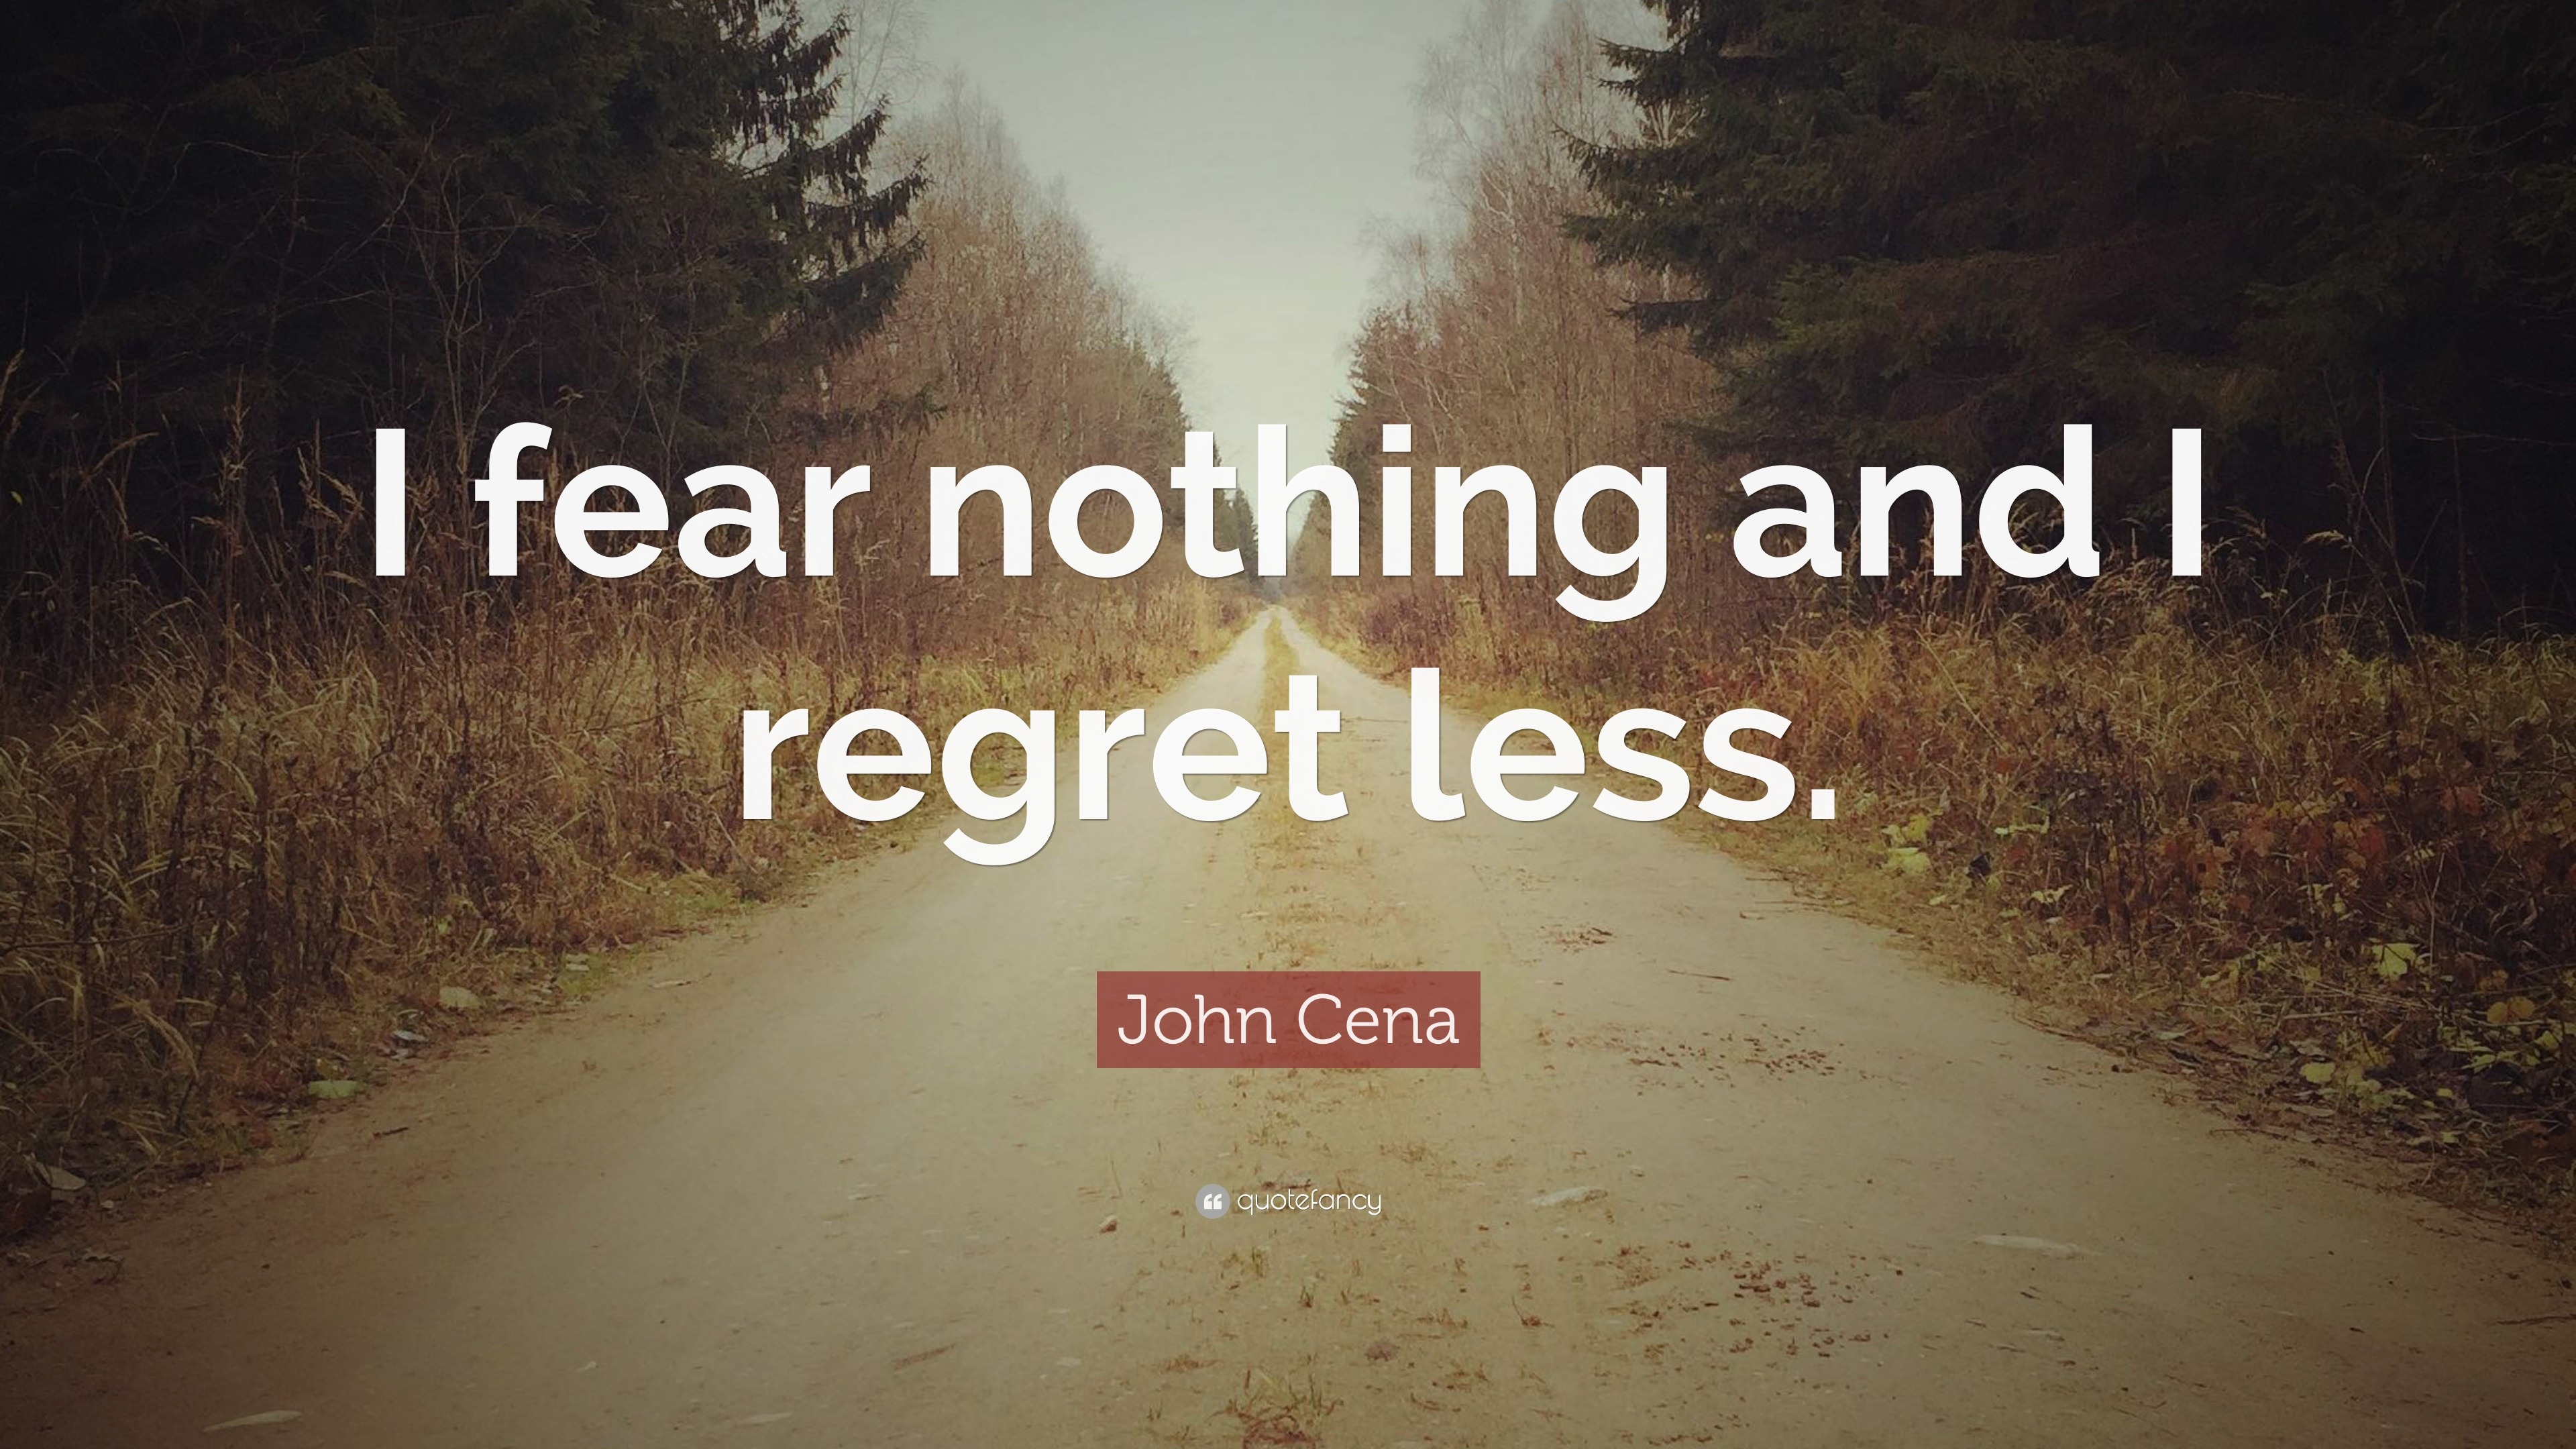 John Cena Quote: "I fear nothing and I regret less." (9 wallpapers) - Quotefancy